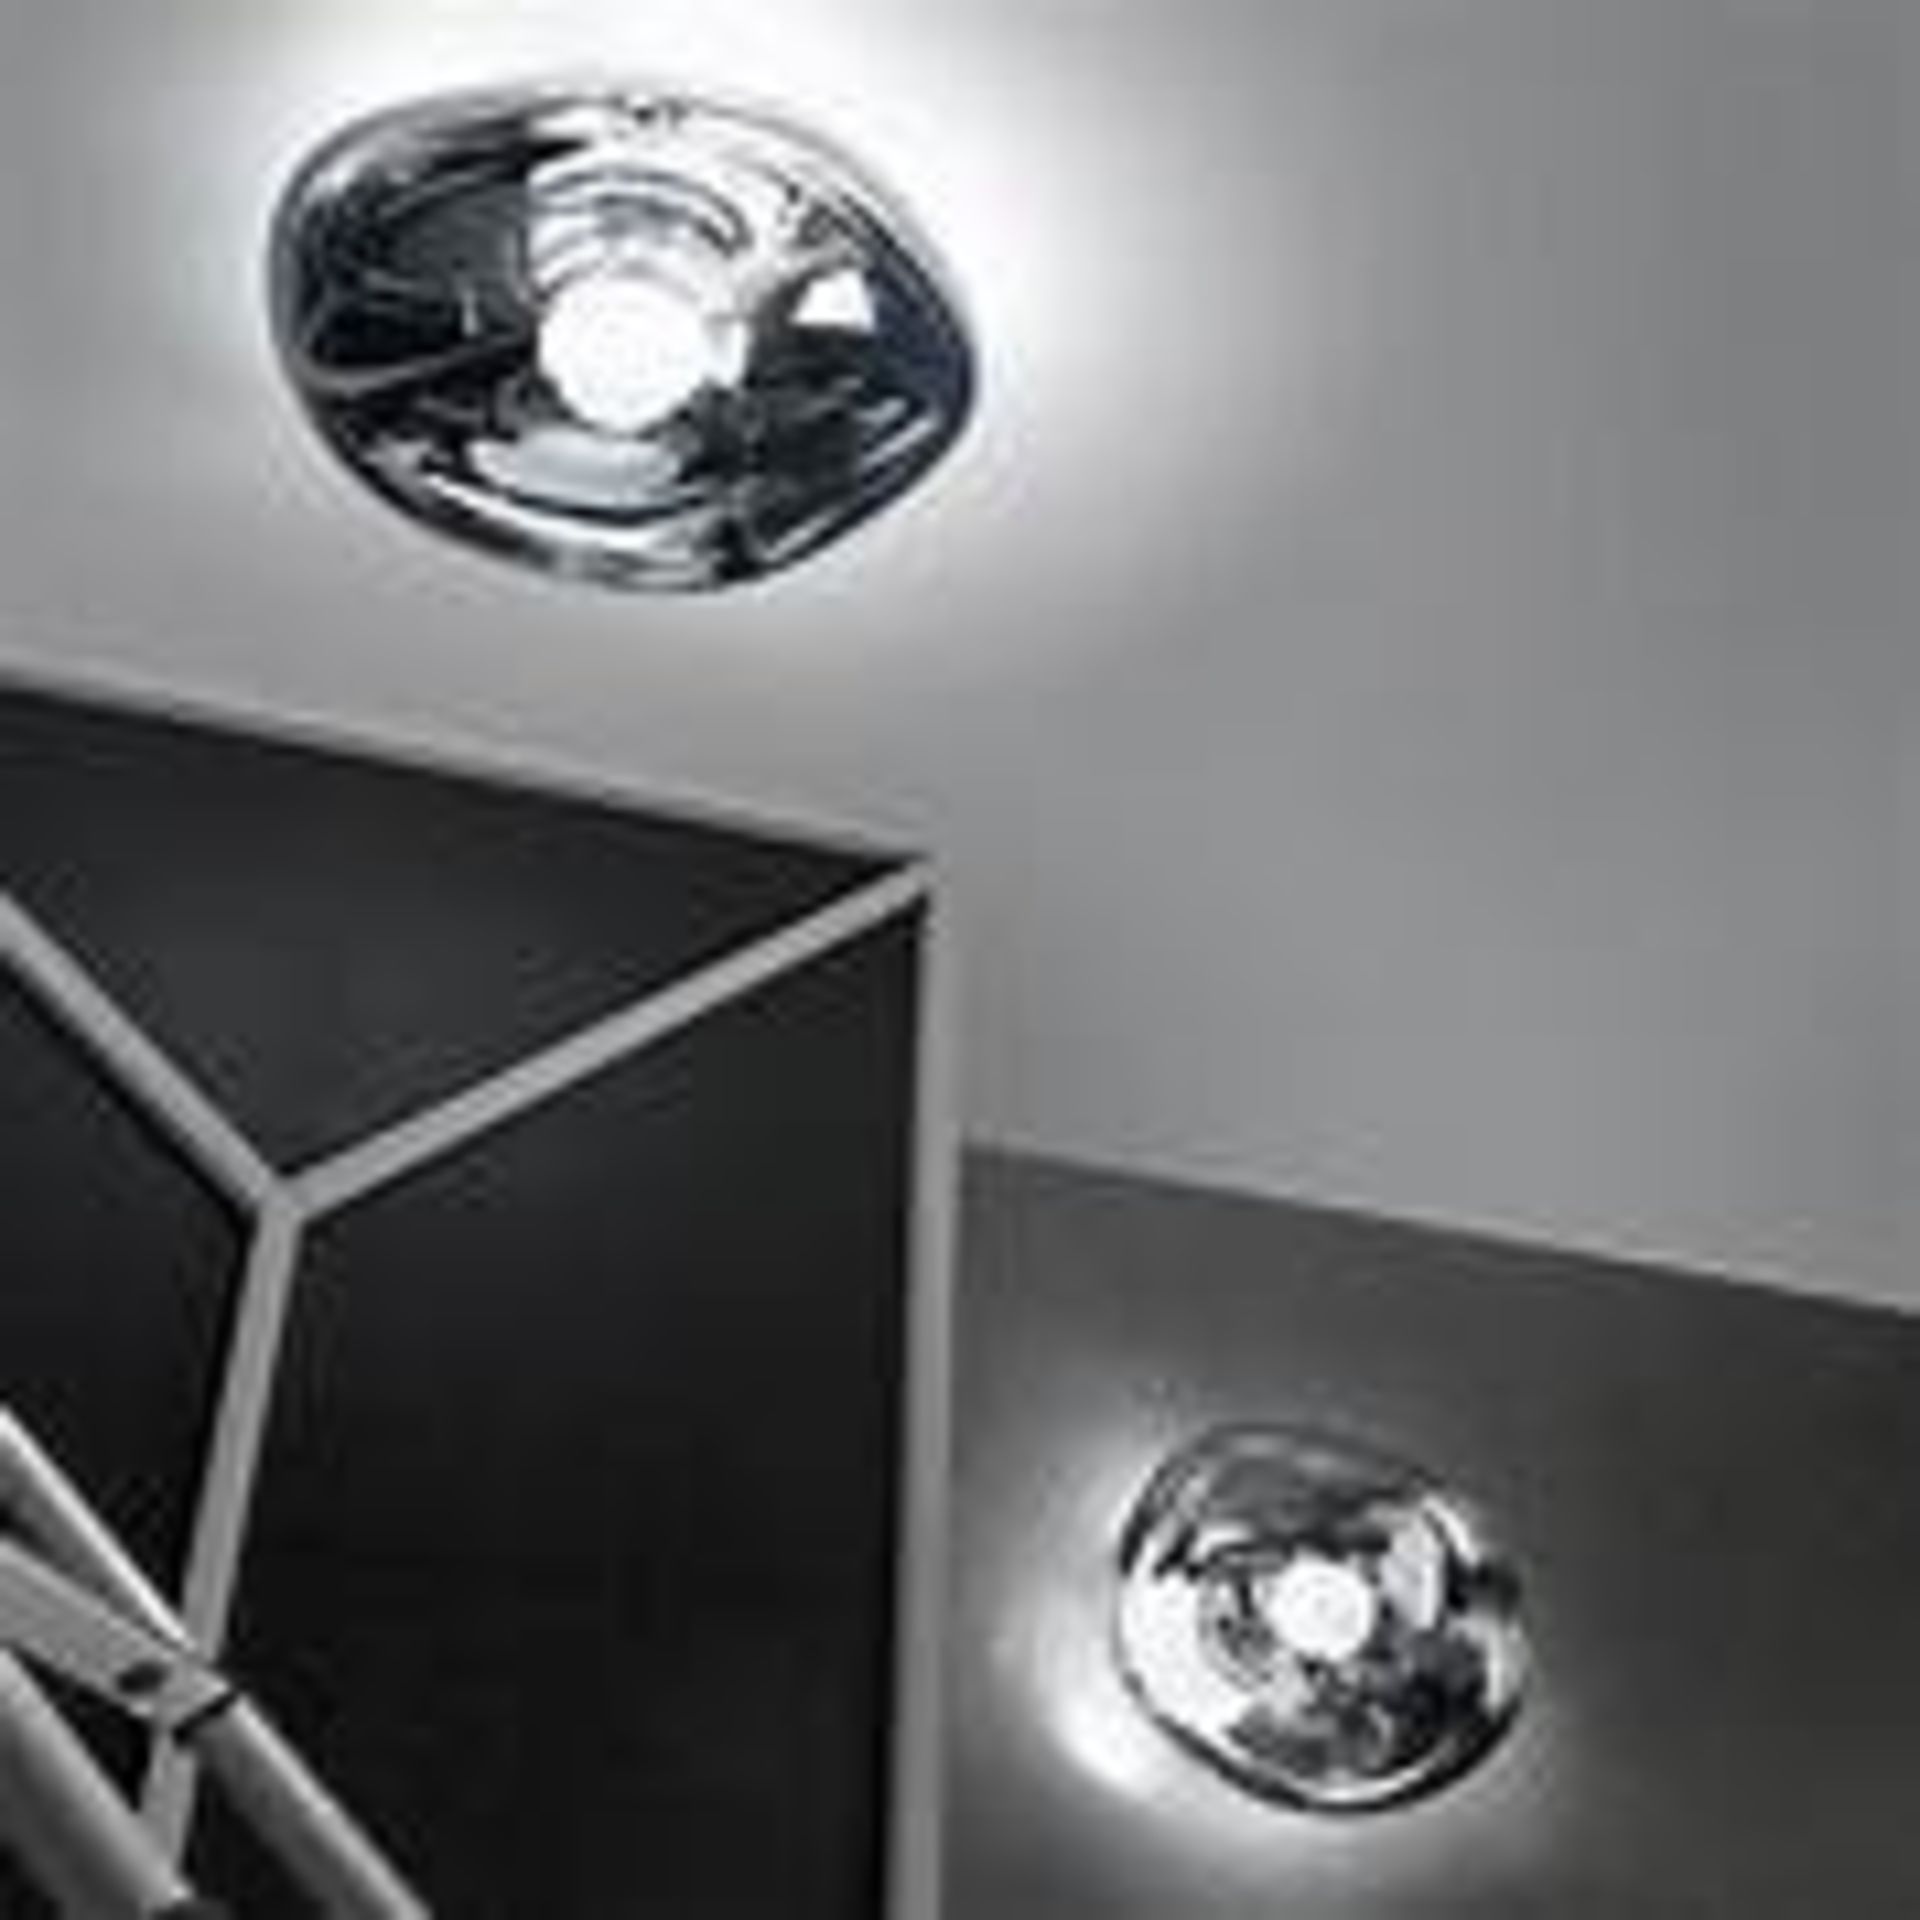 Lava silver wall light the body of the Lava wall light has an organic feel like the melting ice of a - Bild 2 aus 2